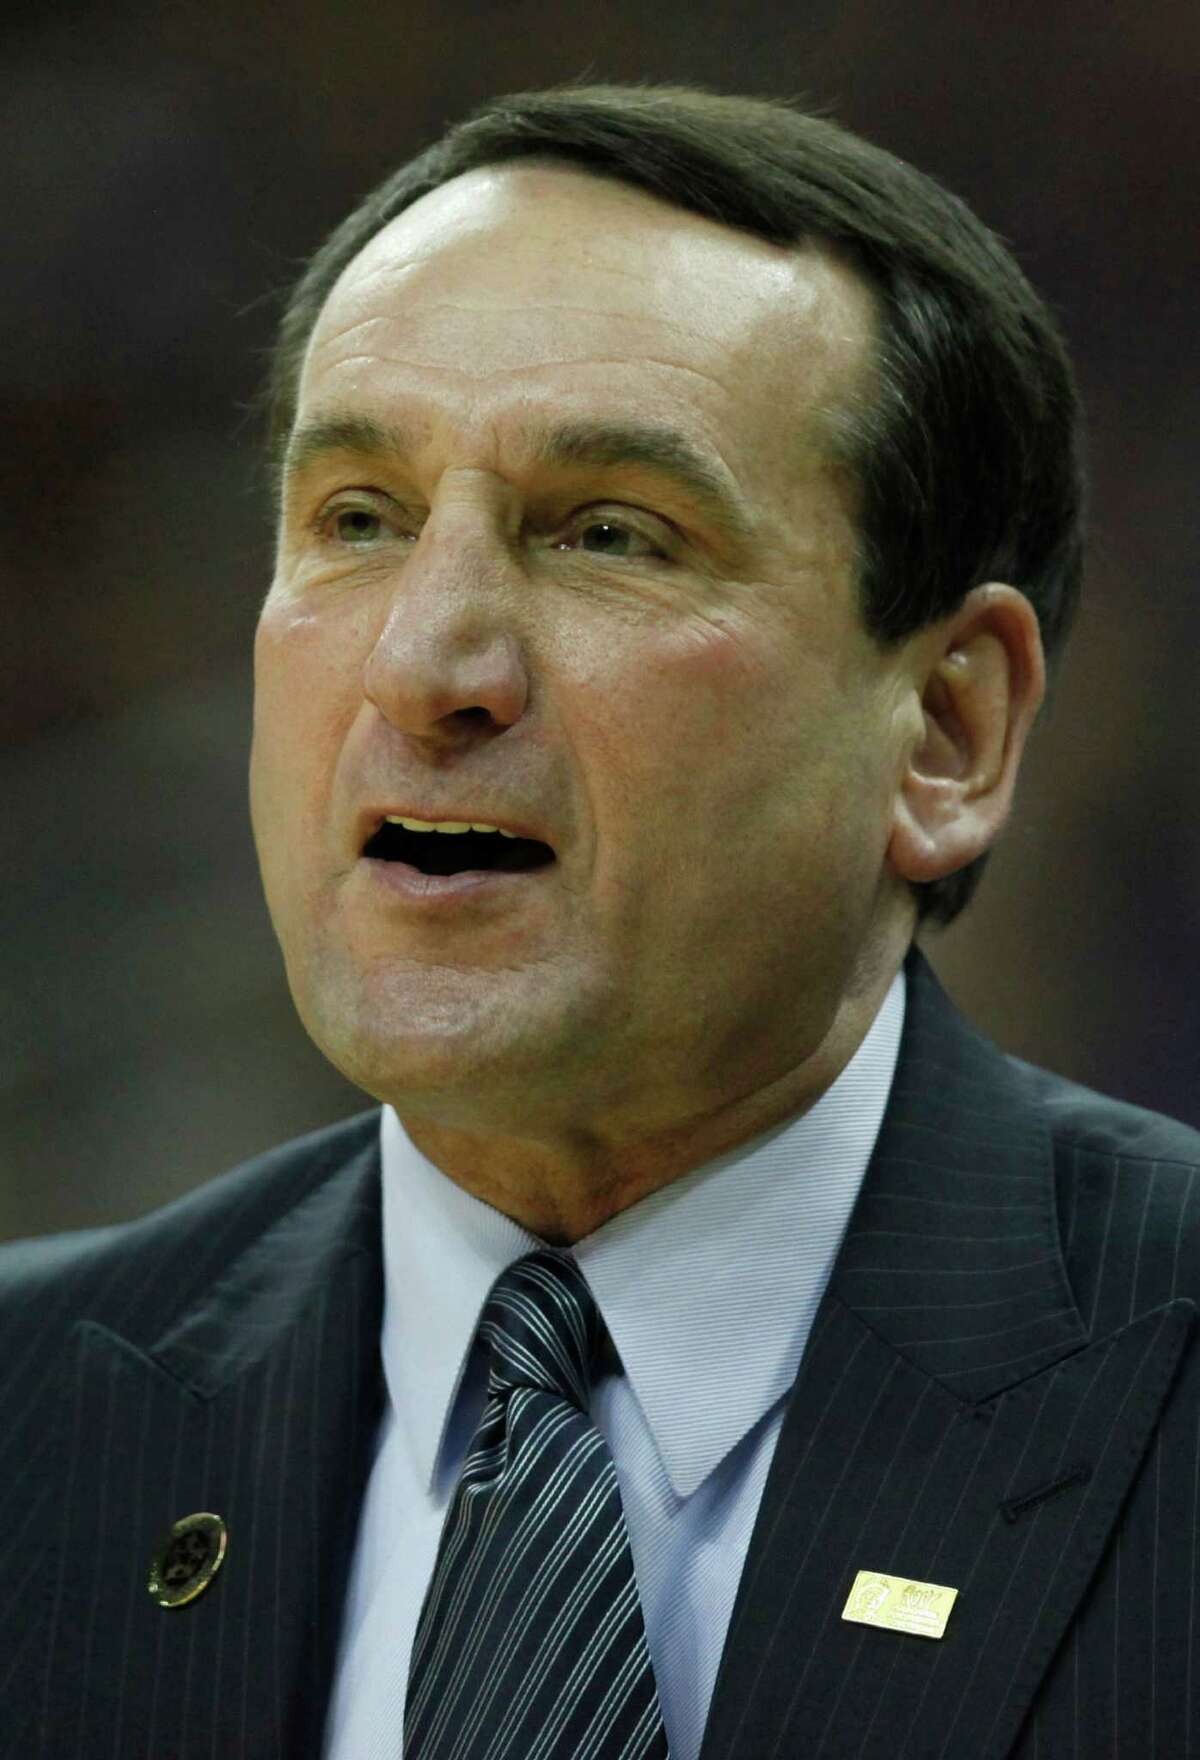 FILE - This Nov. 23, 2010, file photo shows Duke coach Mike Krzyzewski during an NCAA college basketball game against Kansas State, in Kansas City, Mo. These days, nobody who bleeds Duke blue wants Krzyzewski out anytime soon _ especially now that he's about to pass rival Dean Smith on the all-time wins list. (AP Photo/Charlie Riedel, File)